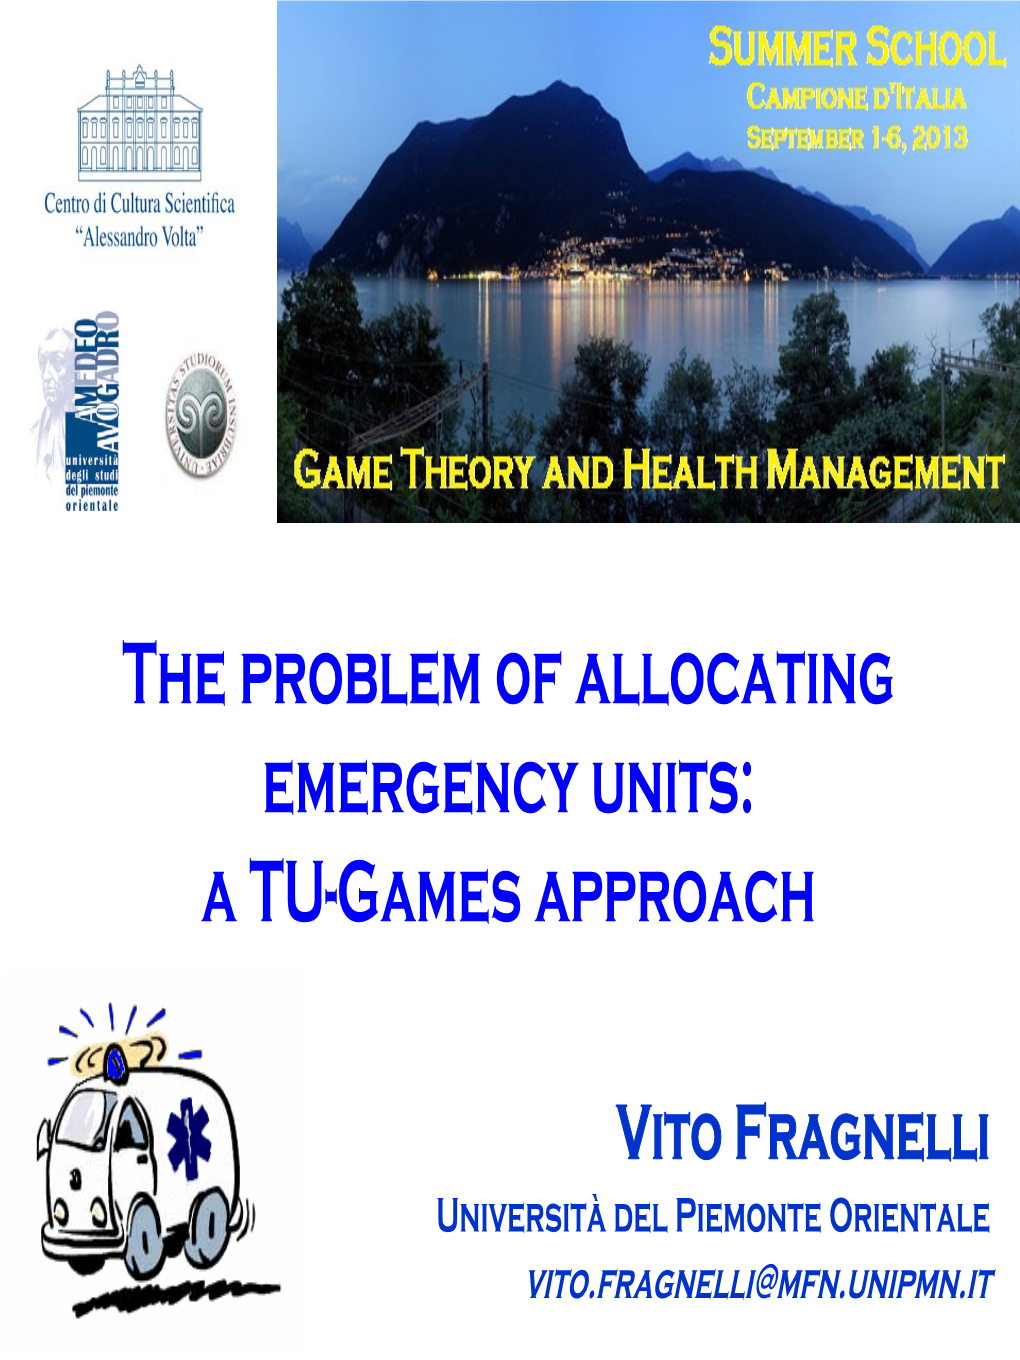 The Problem of Allocating Emergency Units: a TU-Games Approach